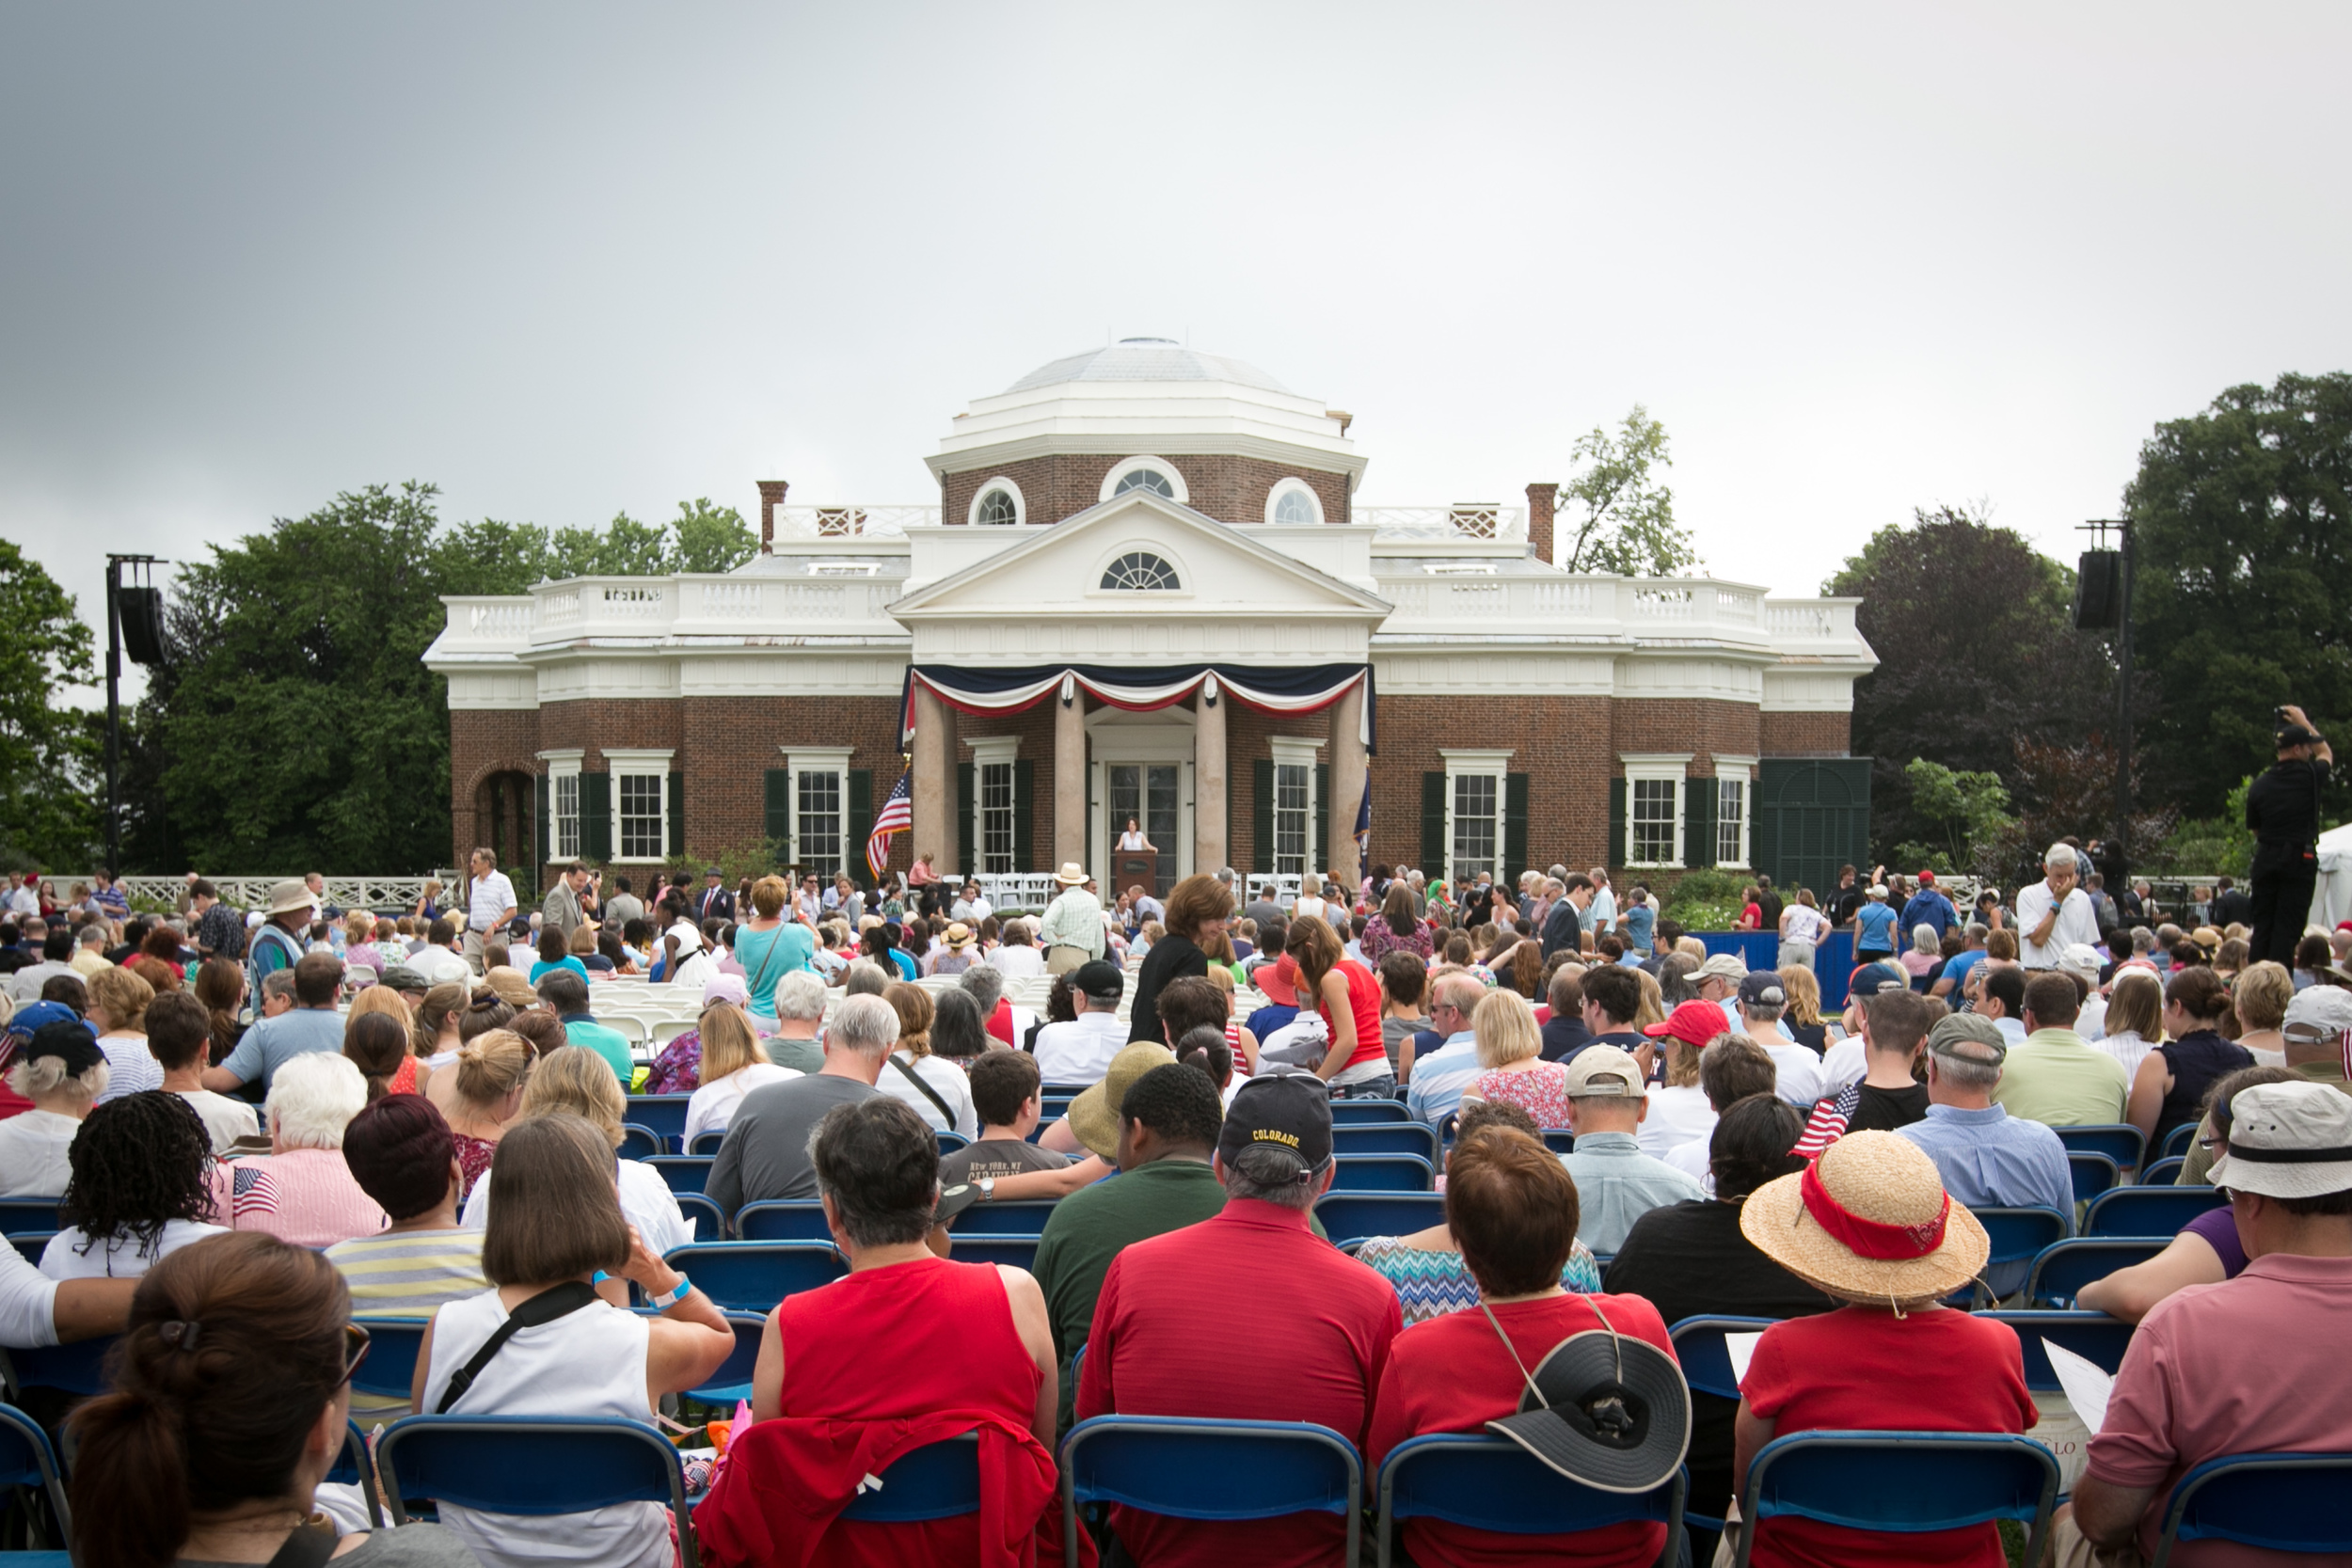 Monticello Independence Day - Rental and Staging - Video Production and Live Streaming - Live Events - The AV Company